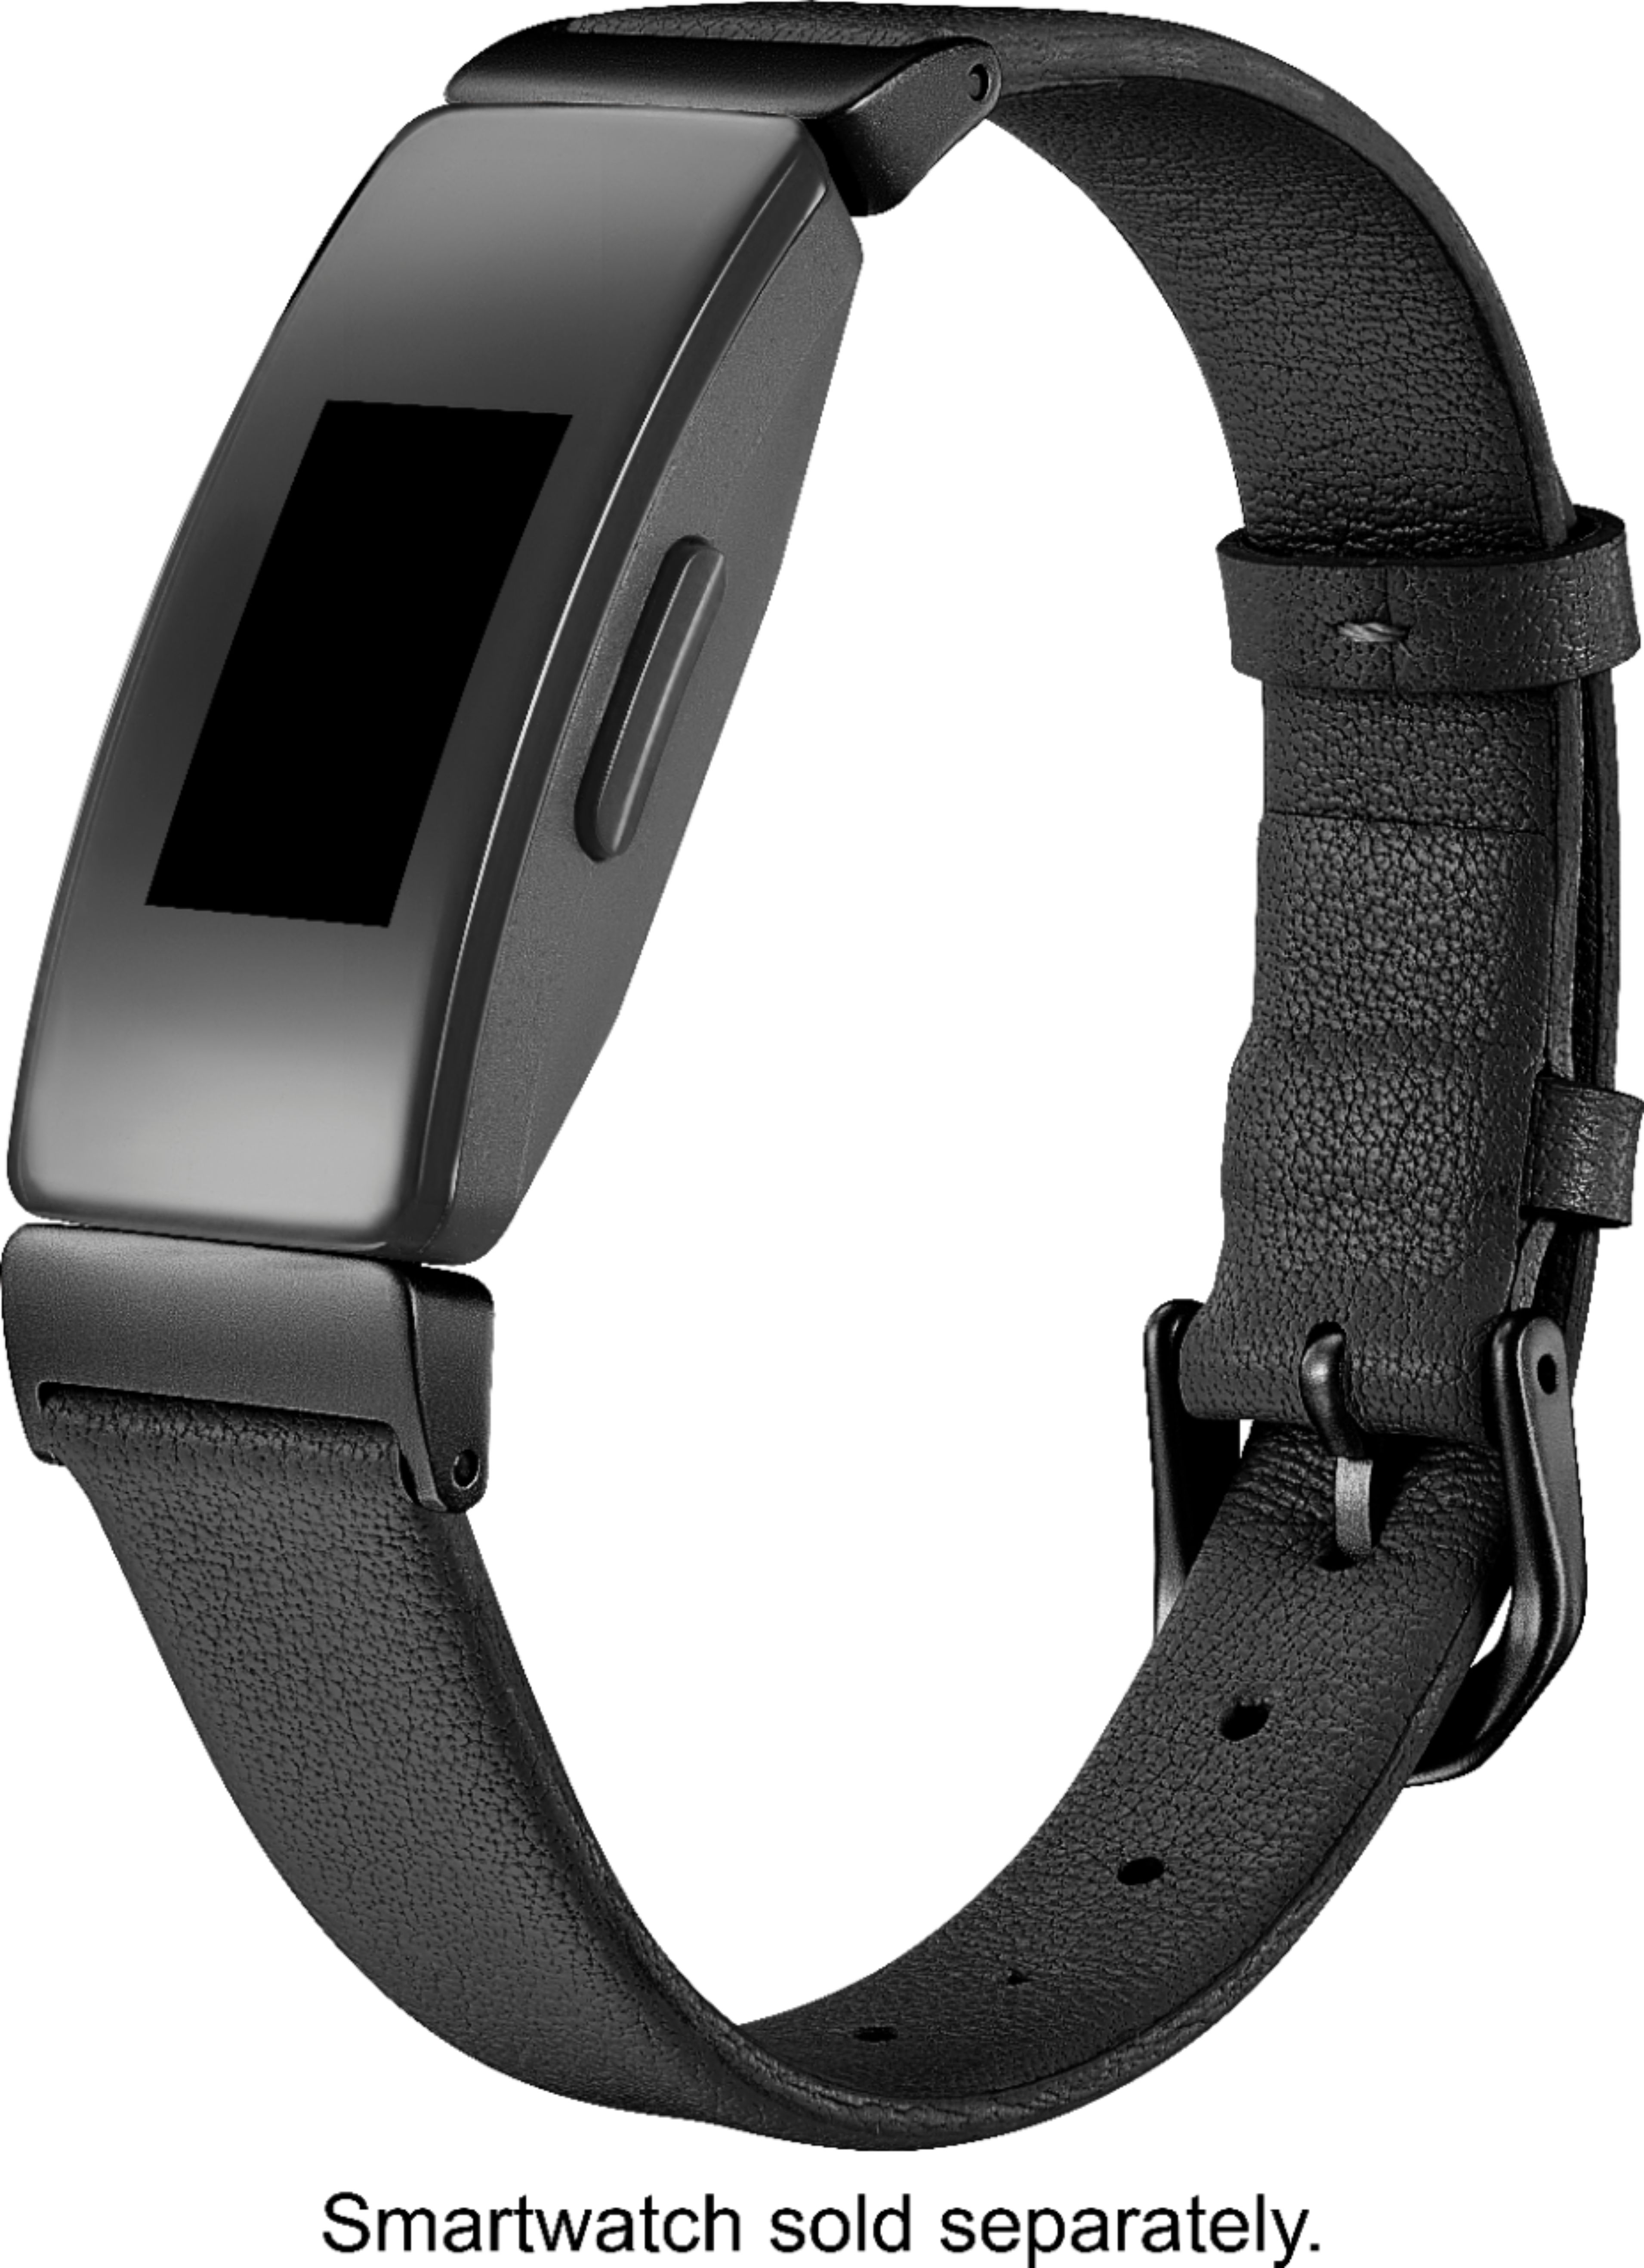 Best Buy: Platinum™ Horween Leather Band for Fitbit Inspire and 